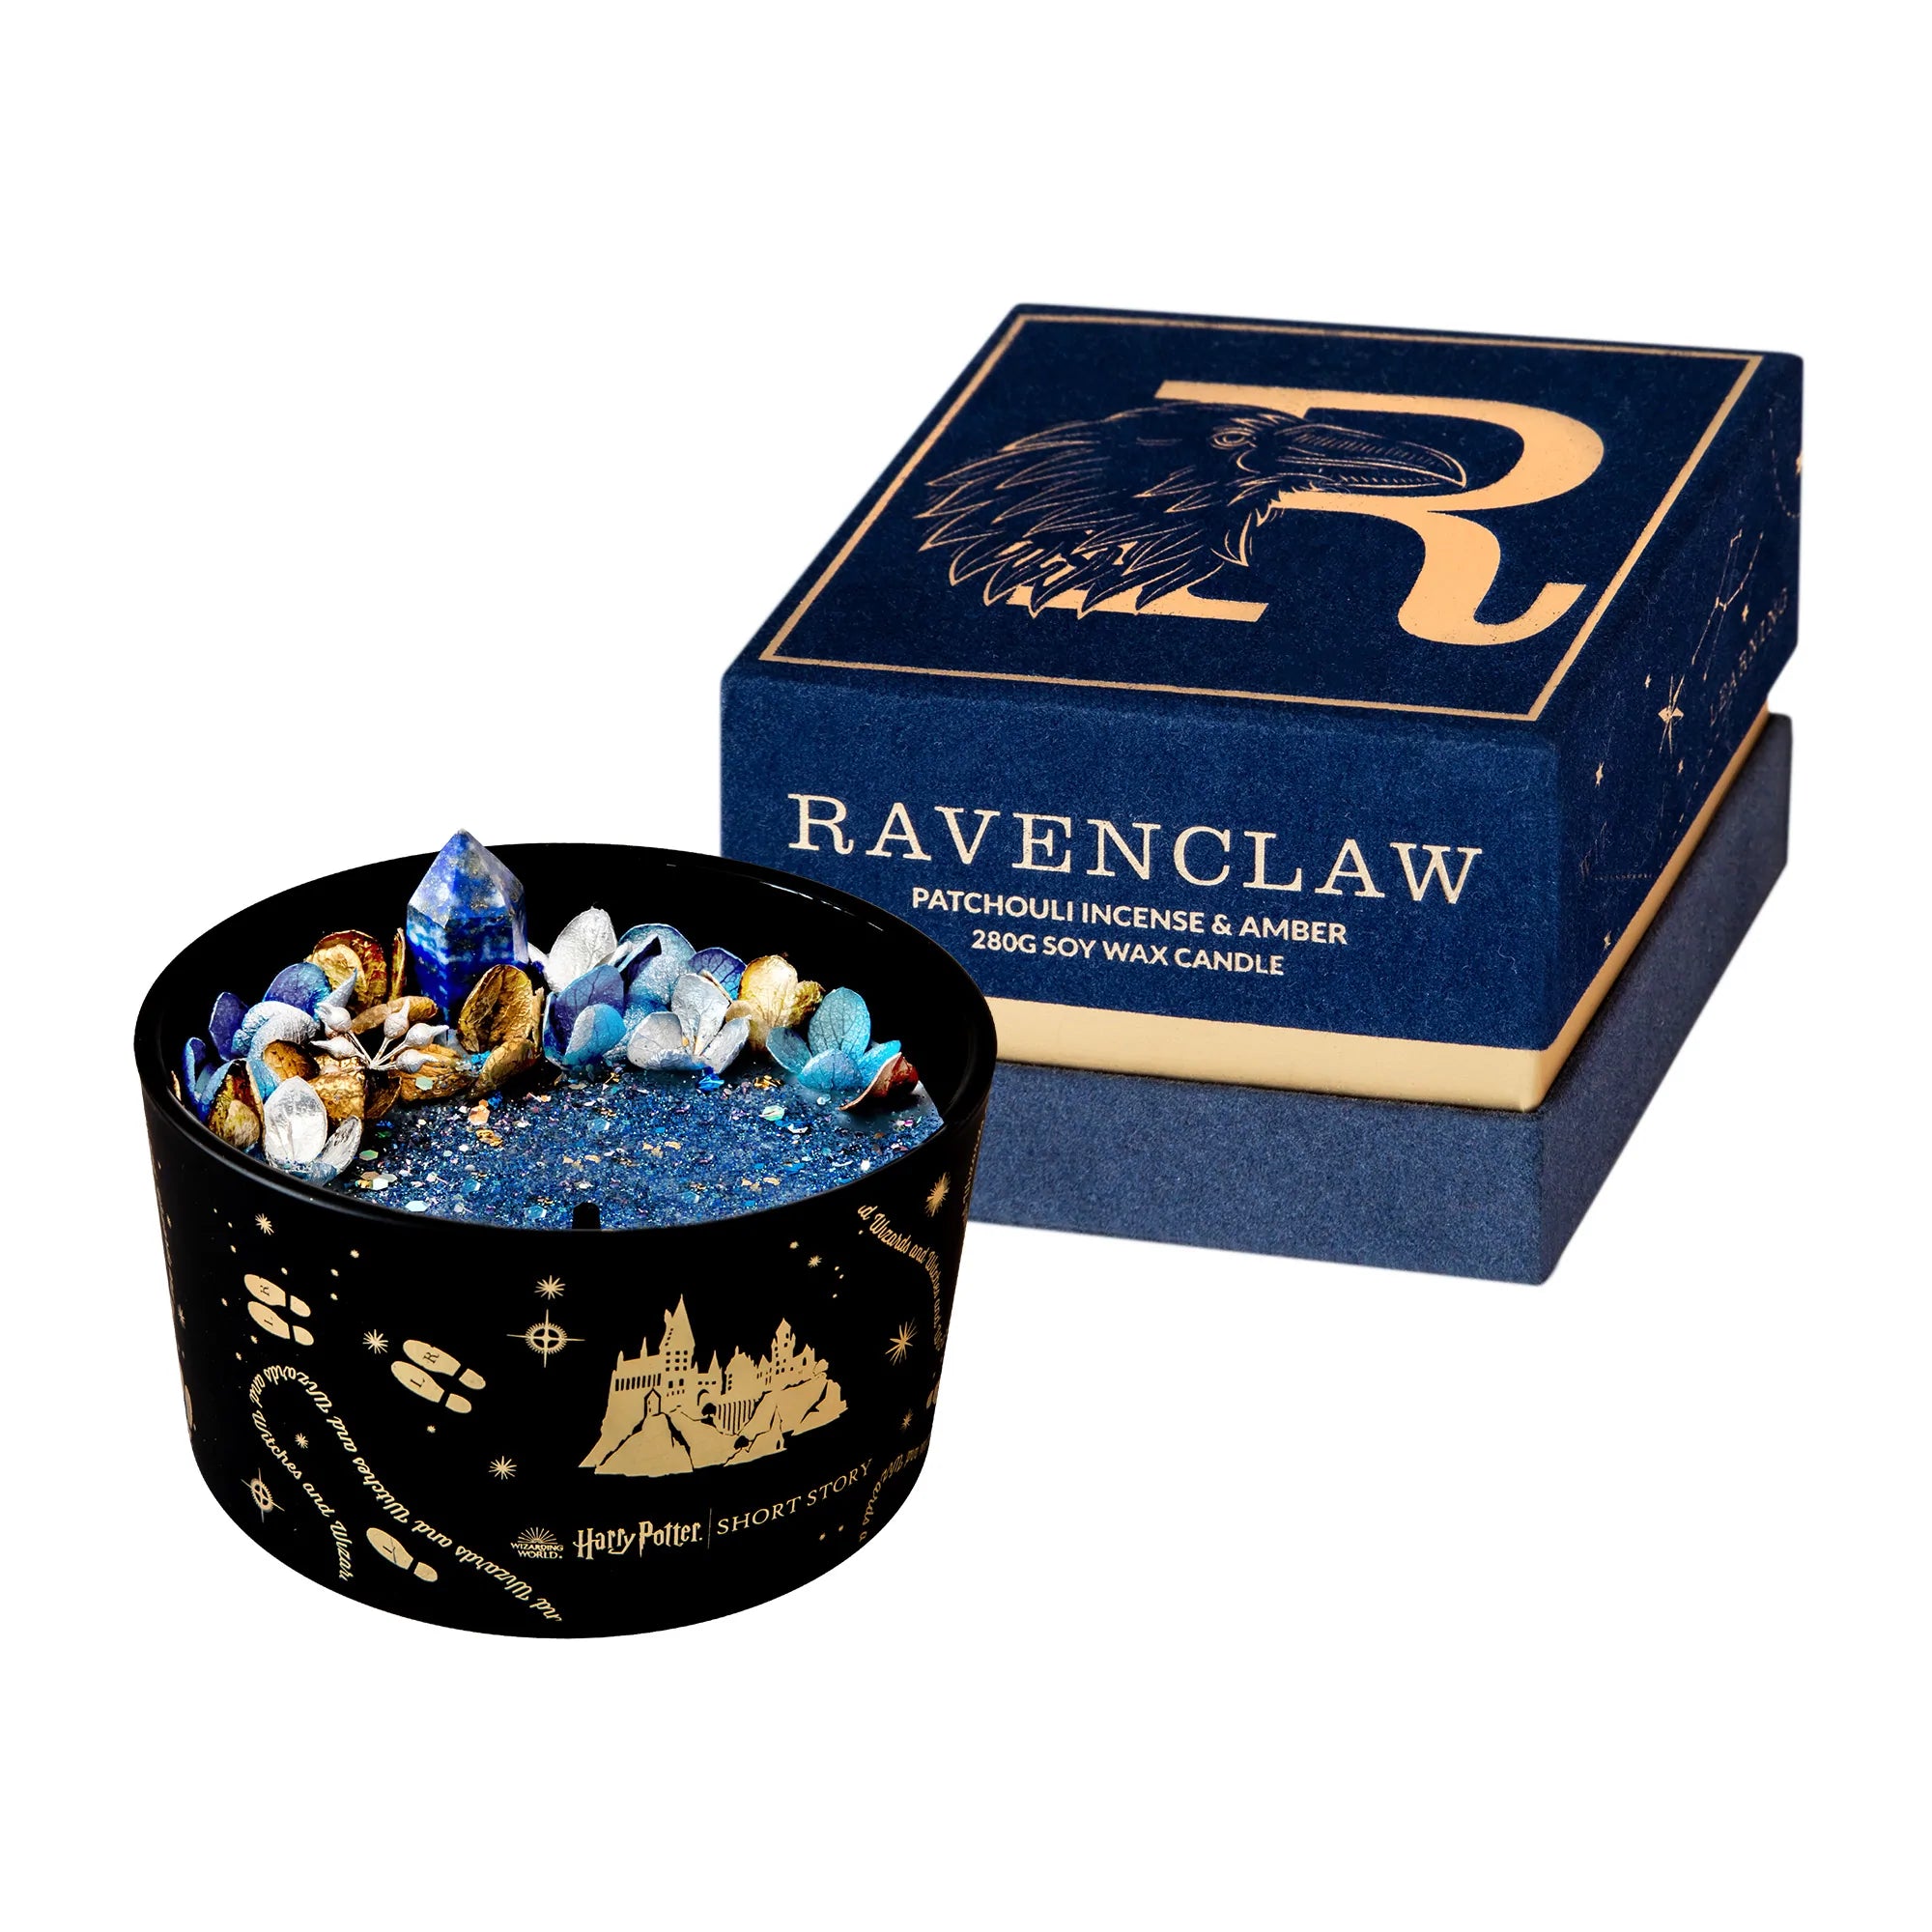 Harry Potter Candle - Ravenclaw (Patchouli Incense & Amber)